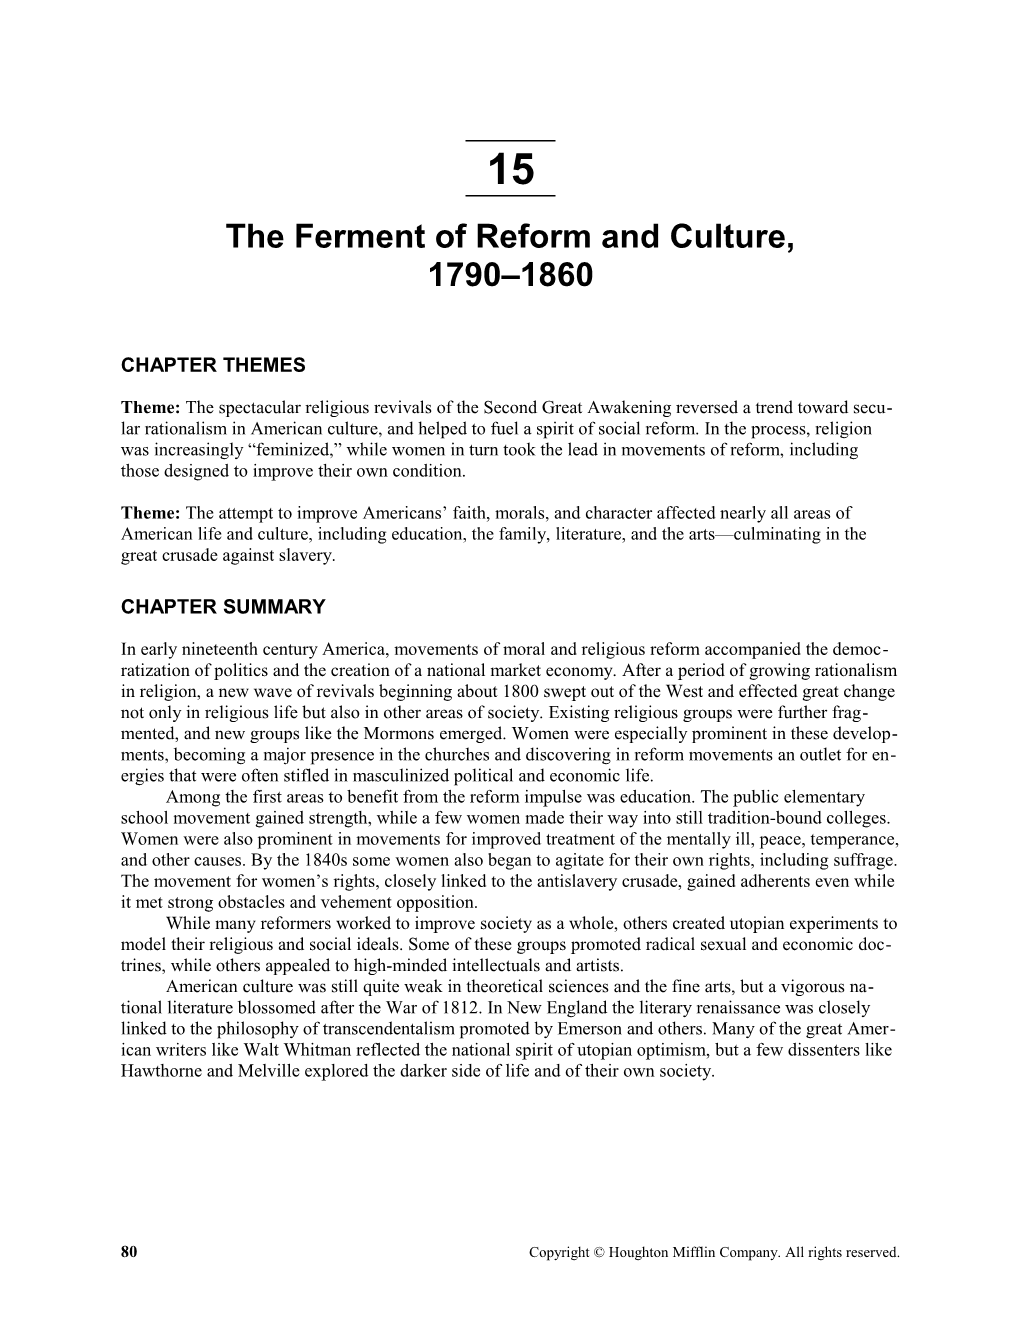 The Ferment of Reform Nd Culture, 1790-1860